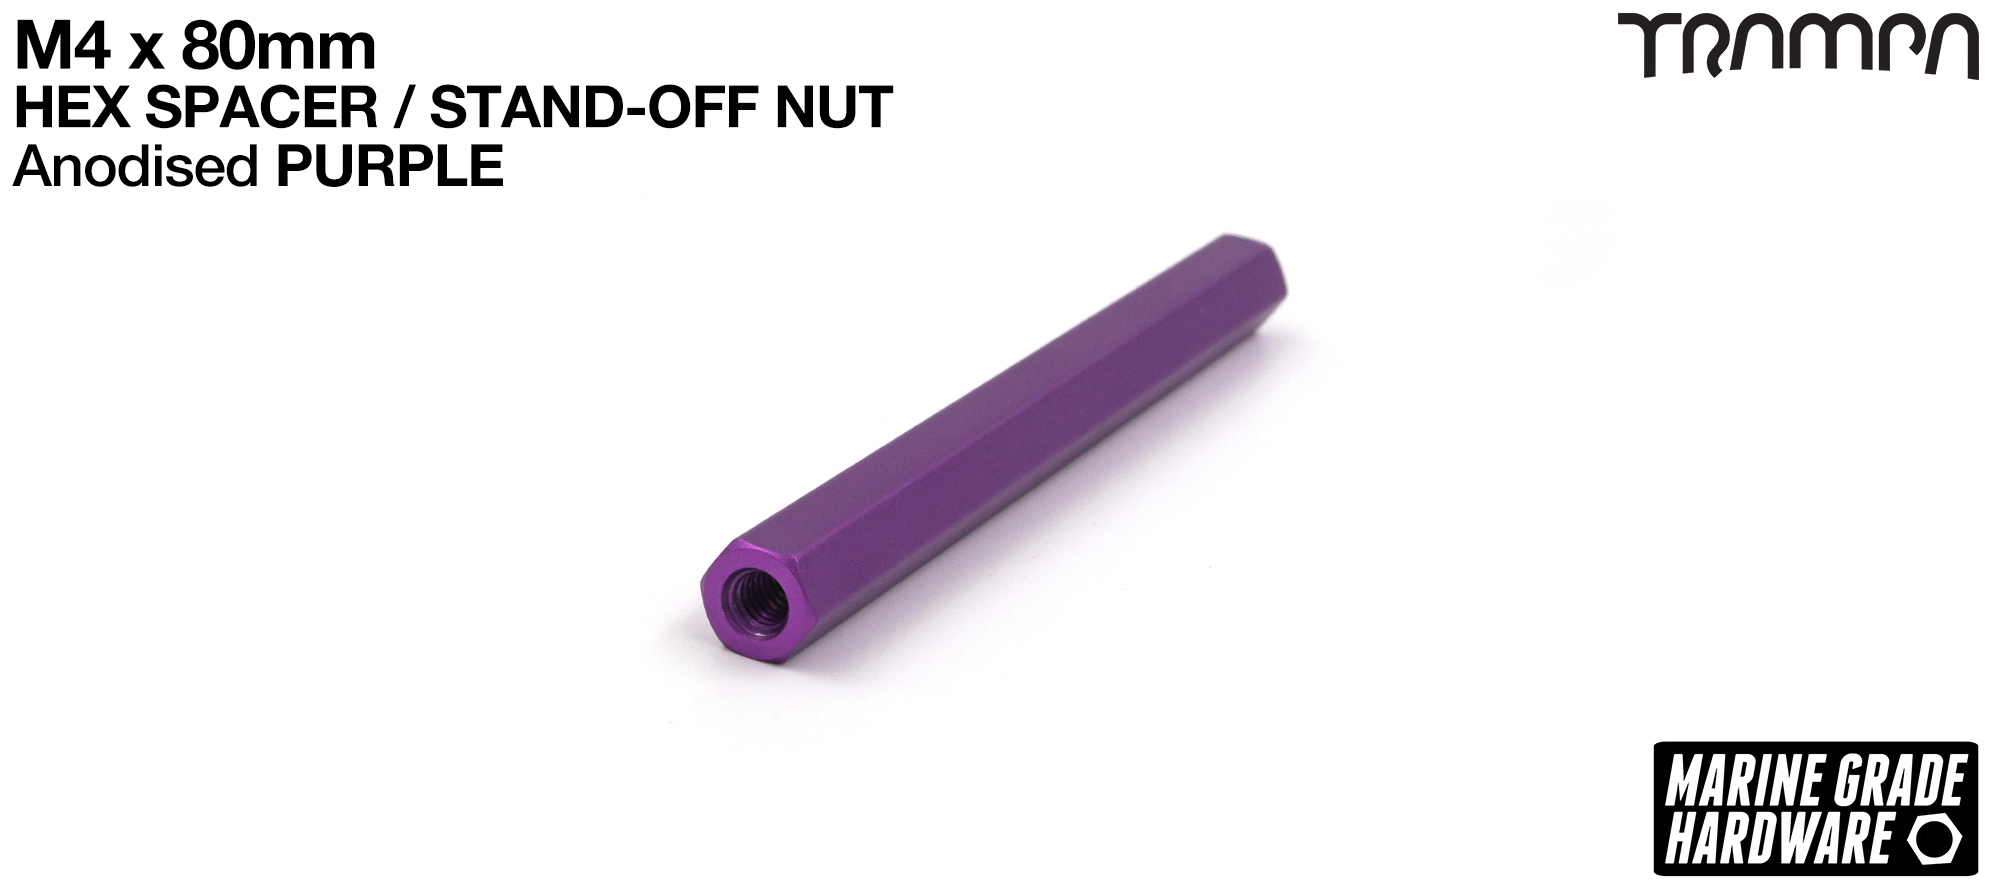 M4 x 80mm Aluminium Threaded Spacer Nut Used for assembling the BEAST Battery Boxes - PURPLE